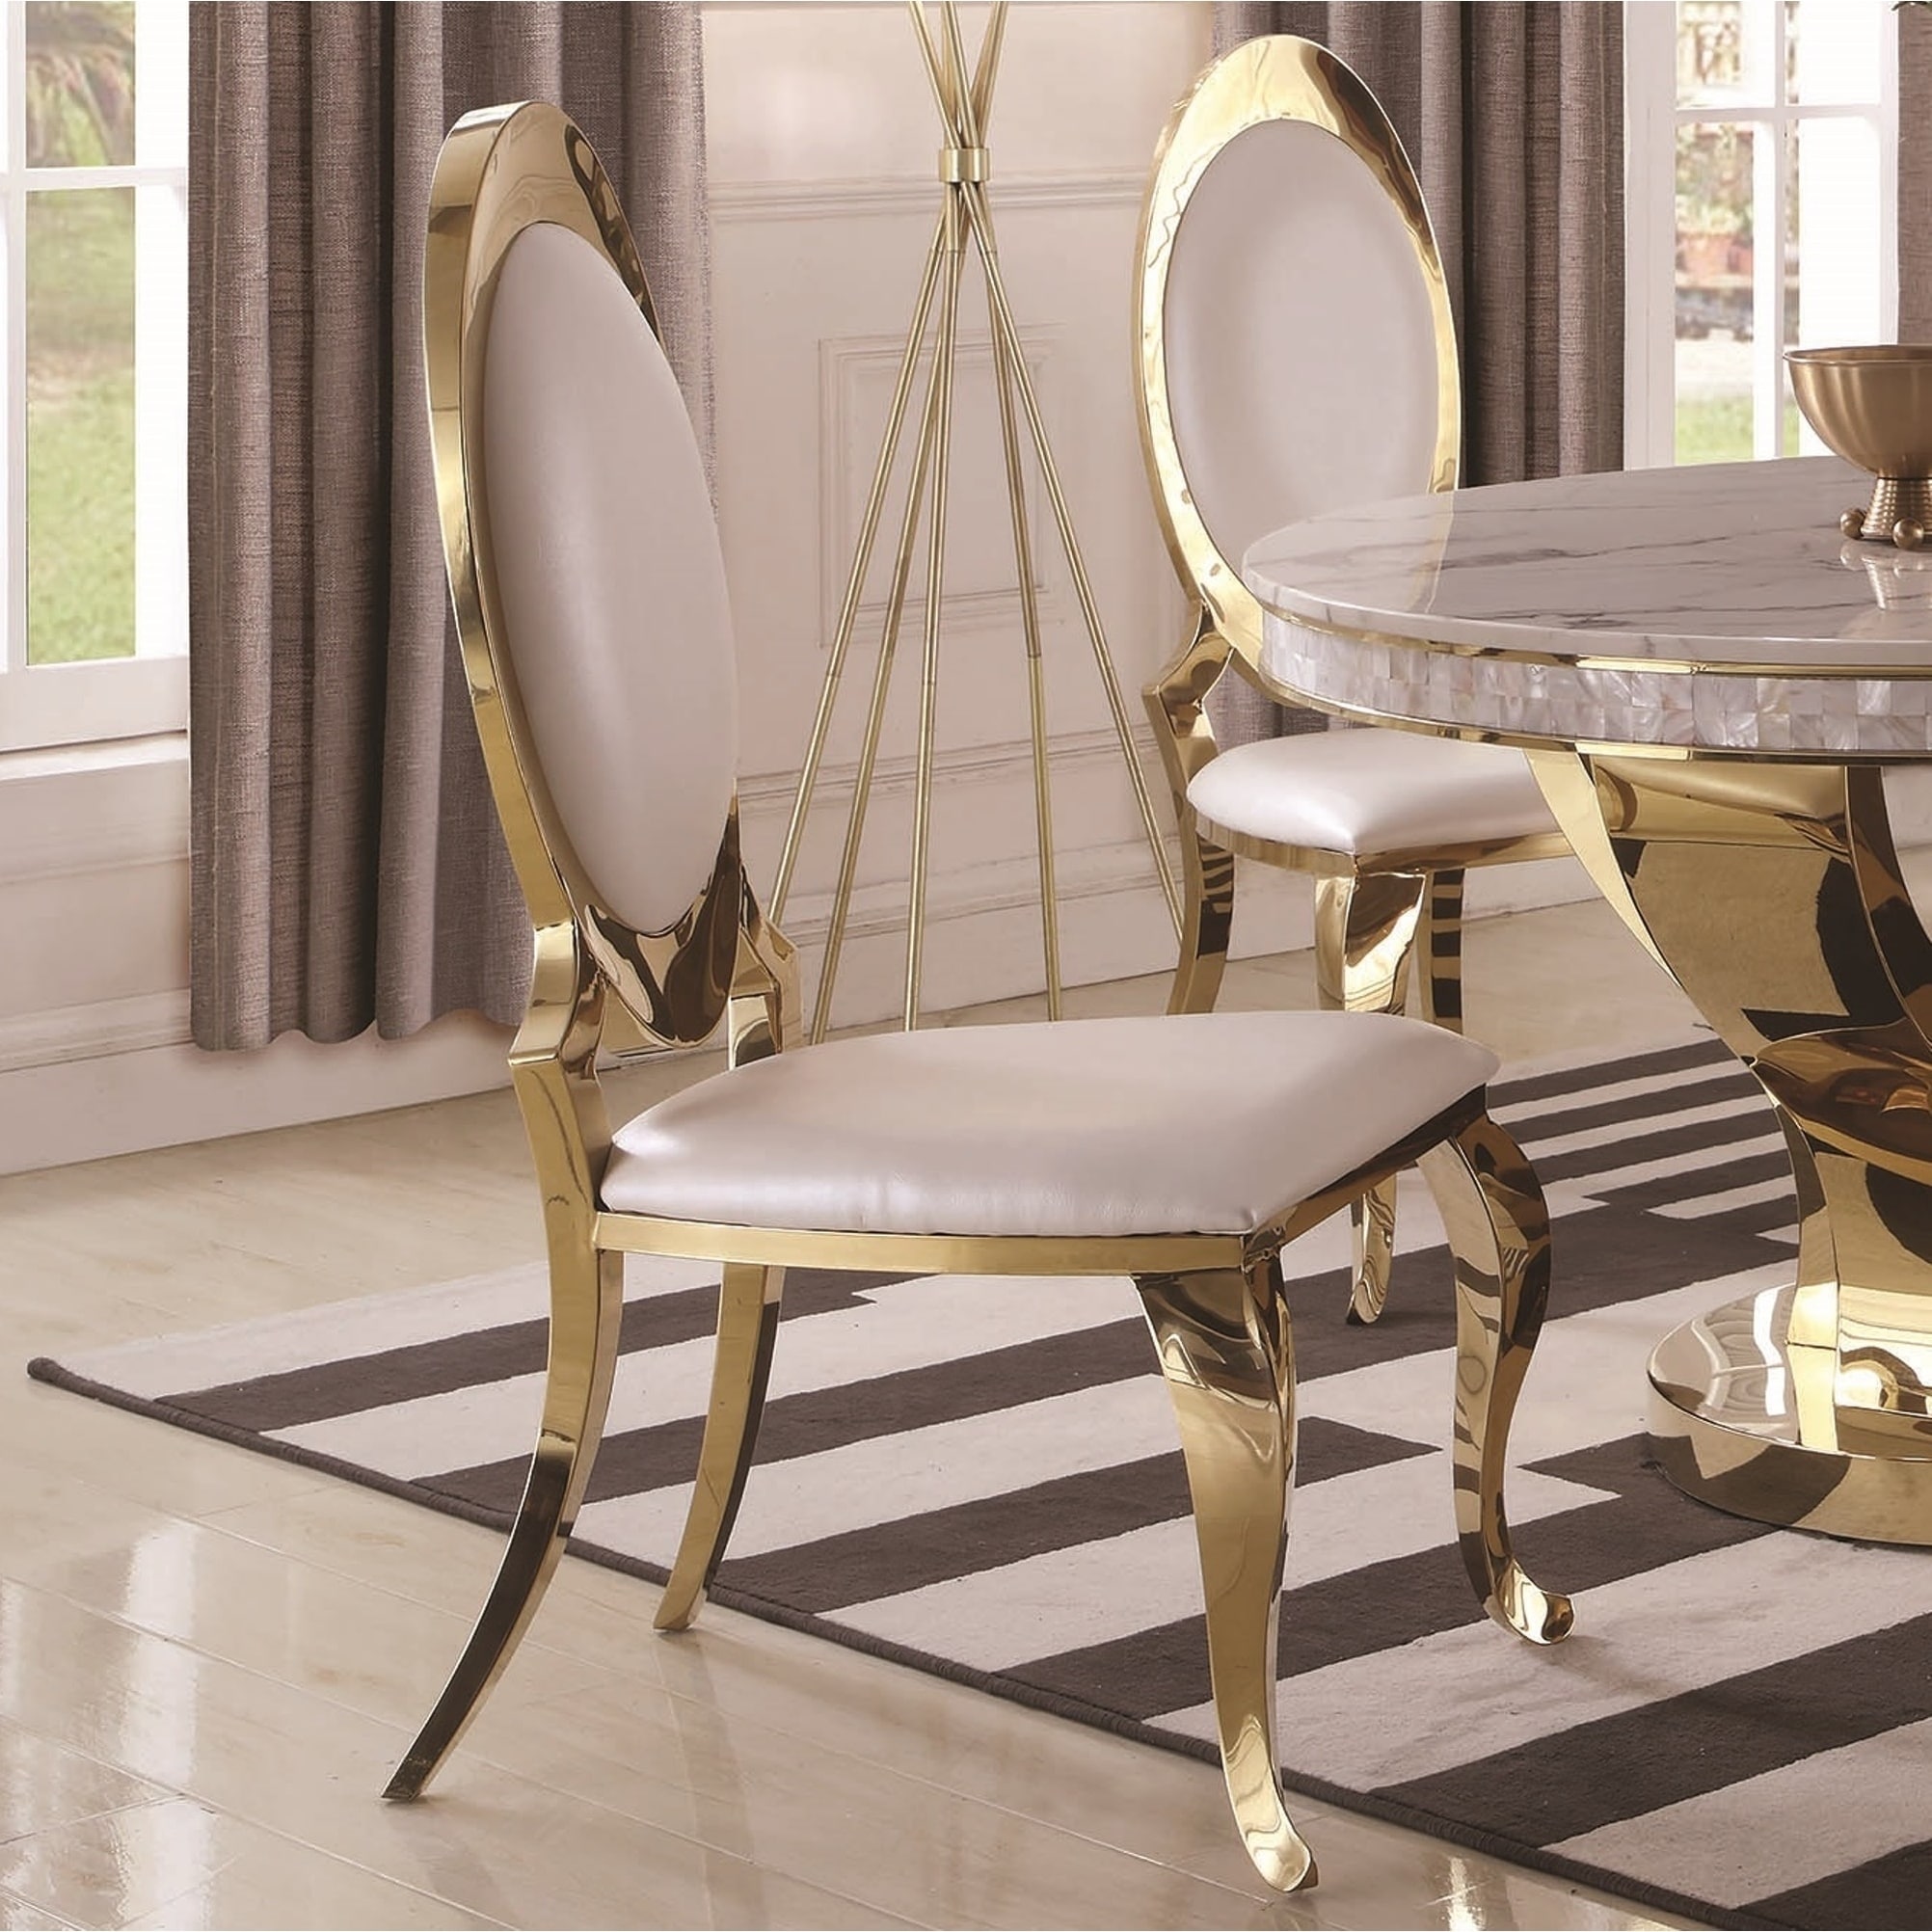 Luxurious Modern Design Gold And White Upholstery Dining Chairs Set Of 2 Overstock 28153856